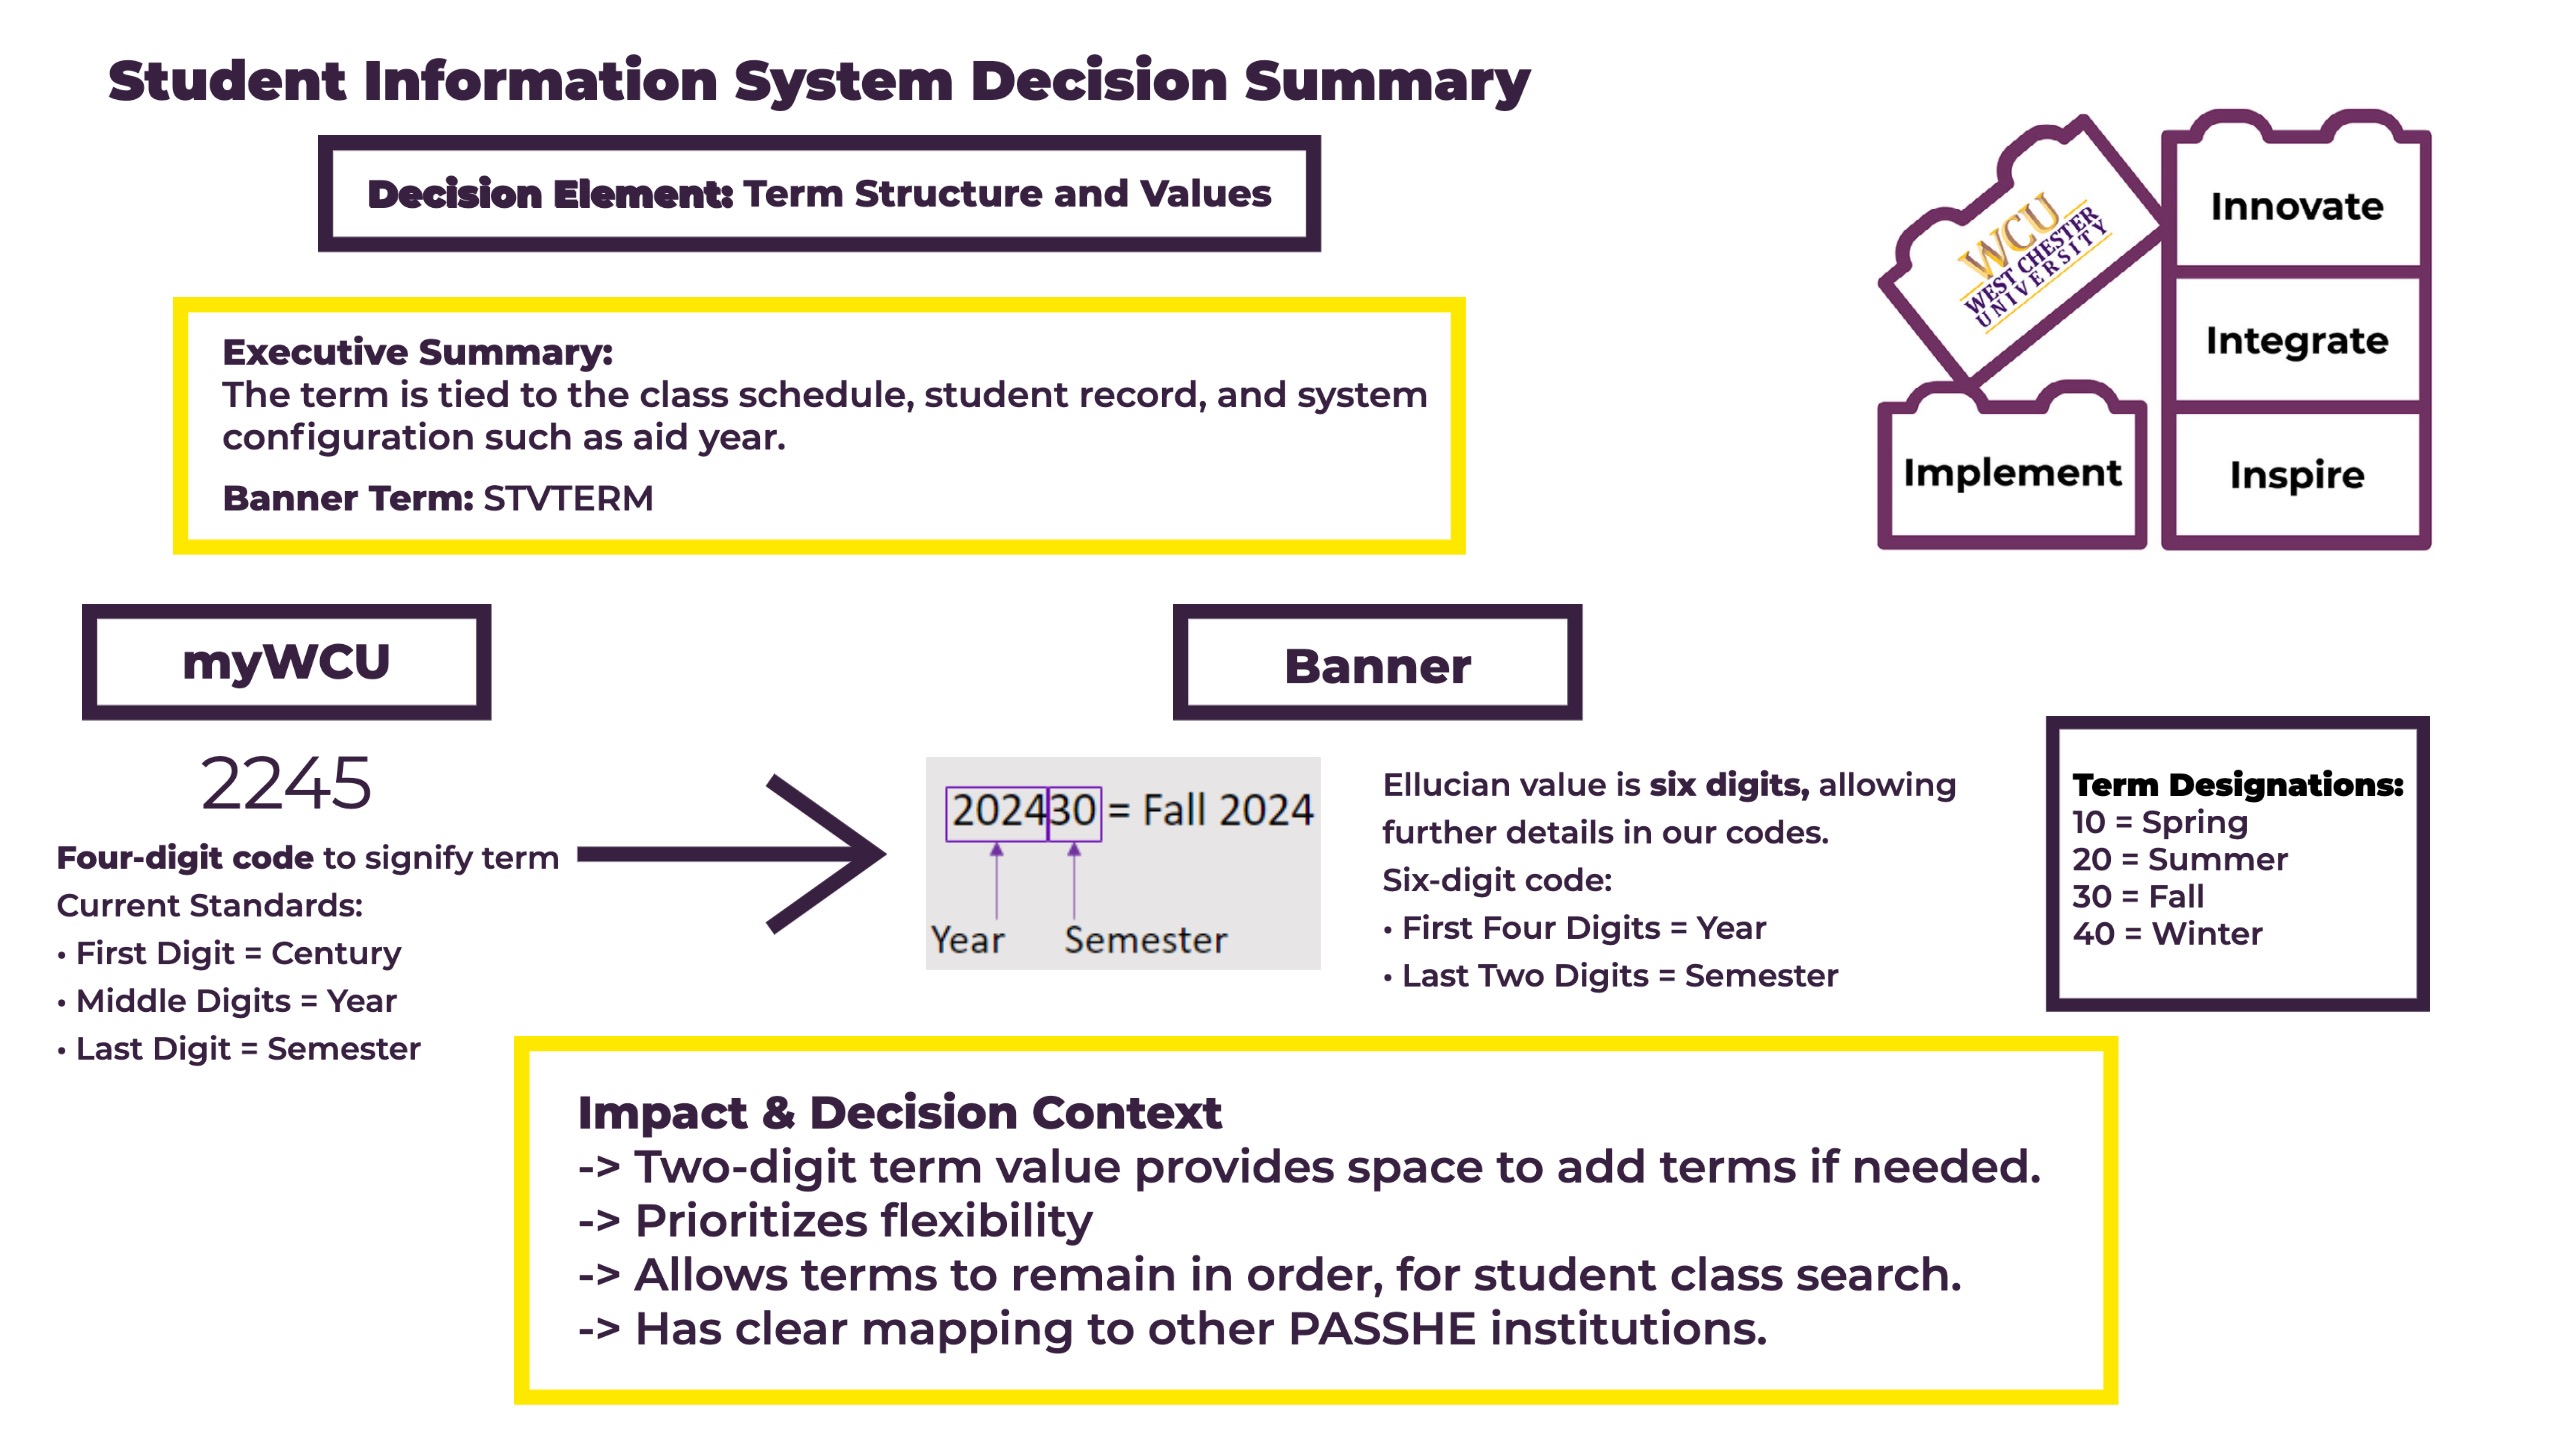 Student Information System Decision Summary Decision Element: Term Structure and Values Executive Summary: The term is tied to the class schedule, student record, and system configuration such as aid year. Banner Term: STVTERM myWCU 2245 Four-digit code to signify term Current Standards: First Digit = Century Middle Digits = Year Last Digit = Semester ↑ Banner 202430 = Fall 2024 Year Semester WCU WEST CHESTER UNIVERSITY Ellucian value is six digits, allowing further details in our codes. Six-digit code: First Four Digits = Year, Last Two Digits = Semester Innovate Implement Inspire Impact & Decision Context -> Two-digit term value provides space to add terms if needed. -> Prioritizes flexibility -> Allows terms to remain in order, for student class search. -> Has clear mapping to other PASSHE institutions. Integrate Term Designations: 10 = Spring 20 = Summer 30 = Fall 40 = Winter